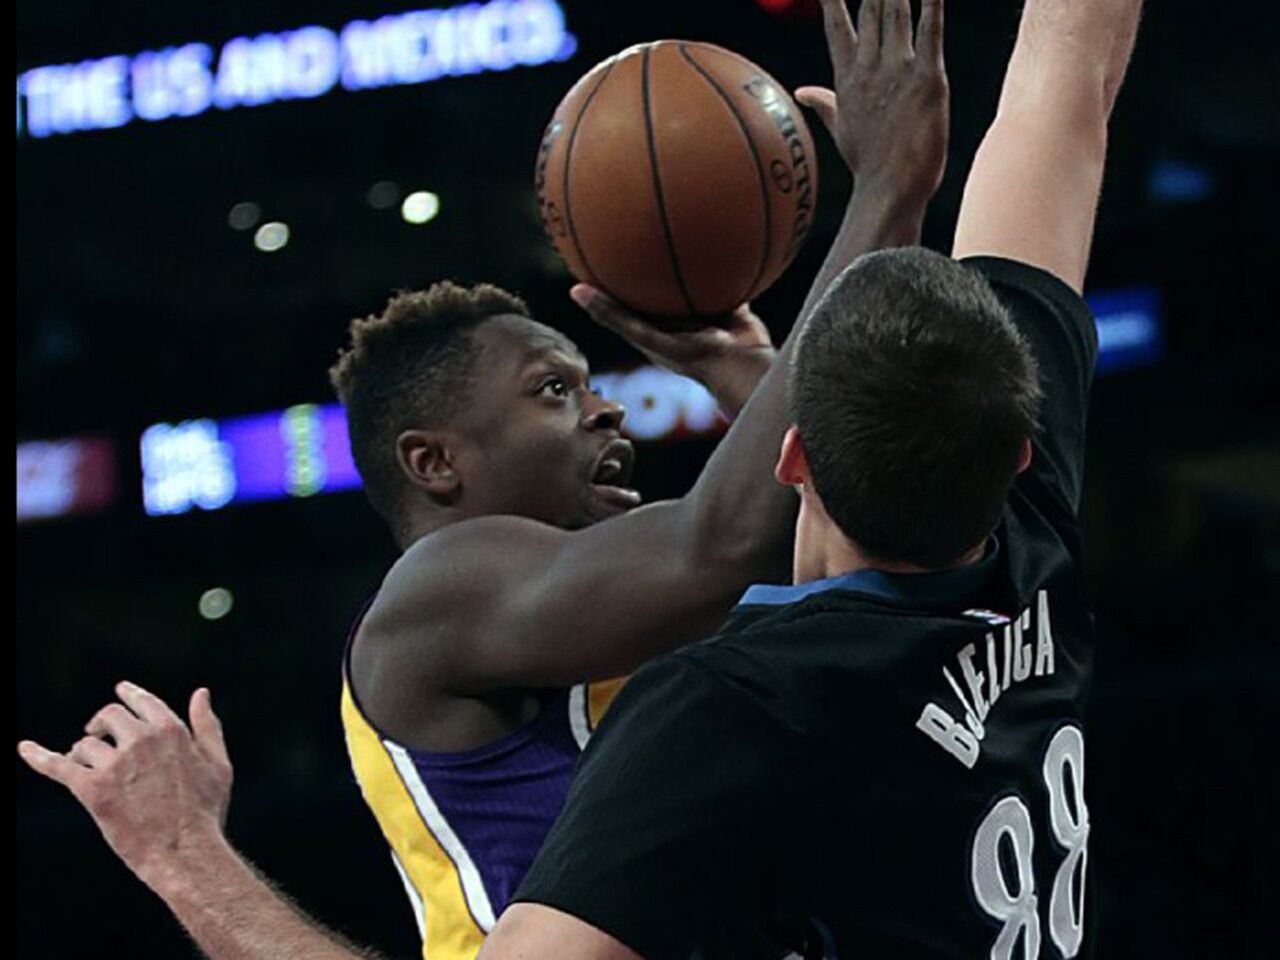 Lakers forward Julius Randle tries to shoot over Timberwolves forward Nemanja Bjelica during the first half of a game at Staples Center on Feb. 2.